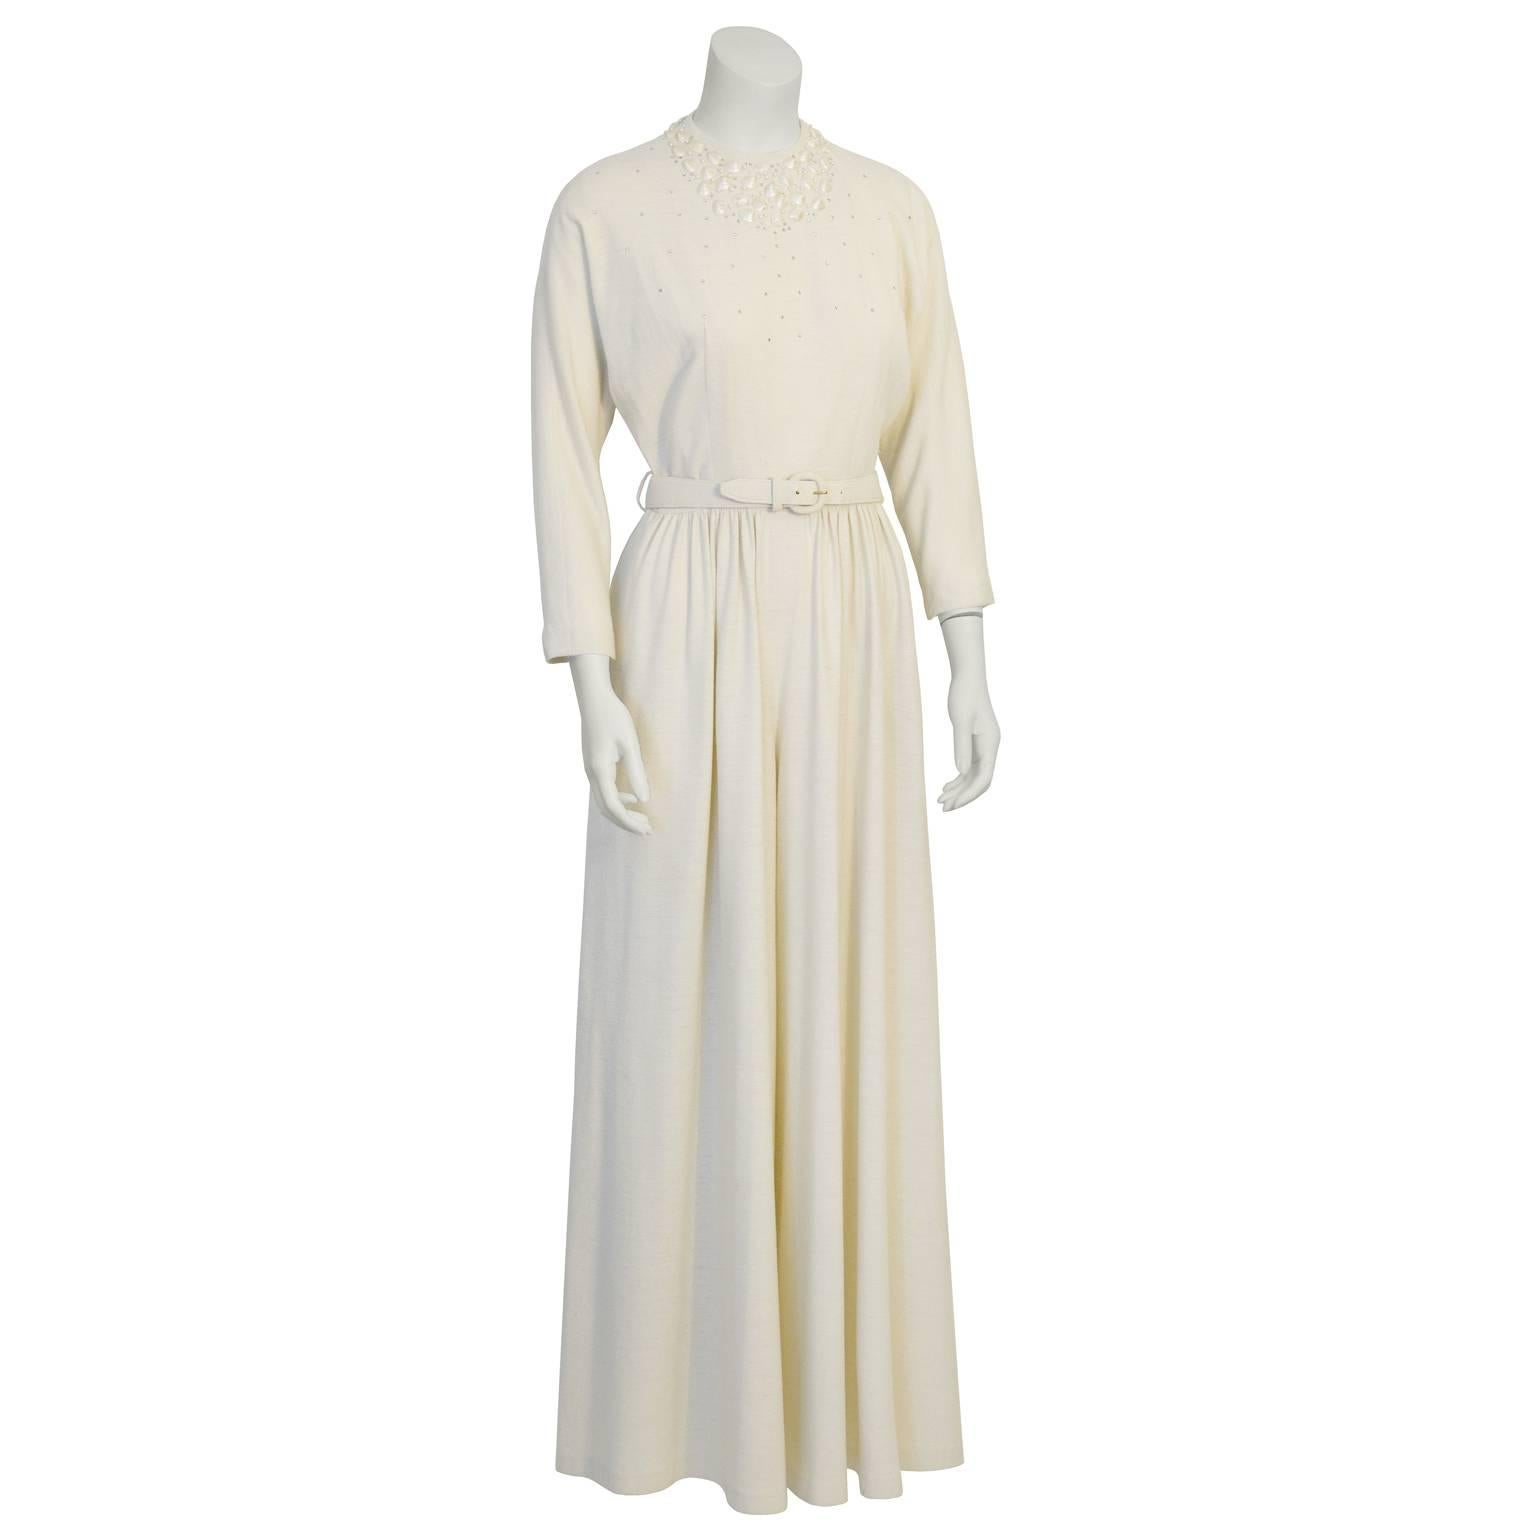 This adorable 1960's Robert Rosenfeld cream jersey jumpsuit features charming seashells and rhinestones around the neck, three quarter sleeves, a cinched waist and wide legged, palazzo pants. Very Hollywood Hostess glamour. Back zip closure. A